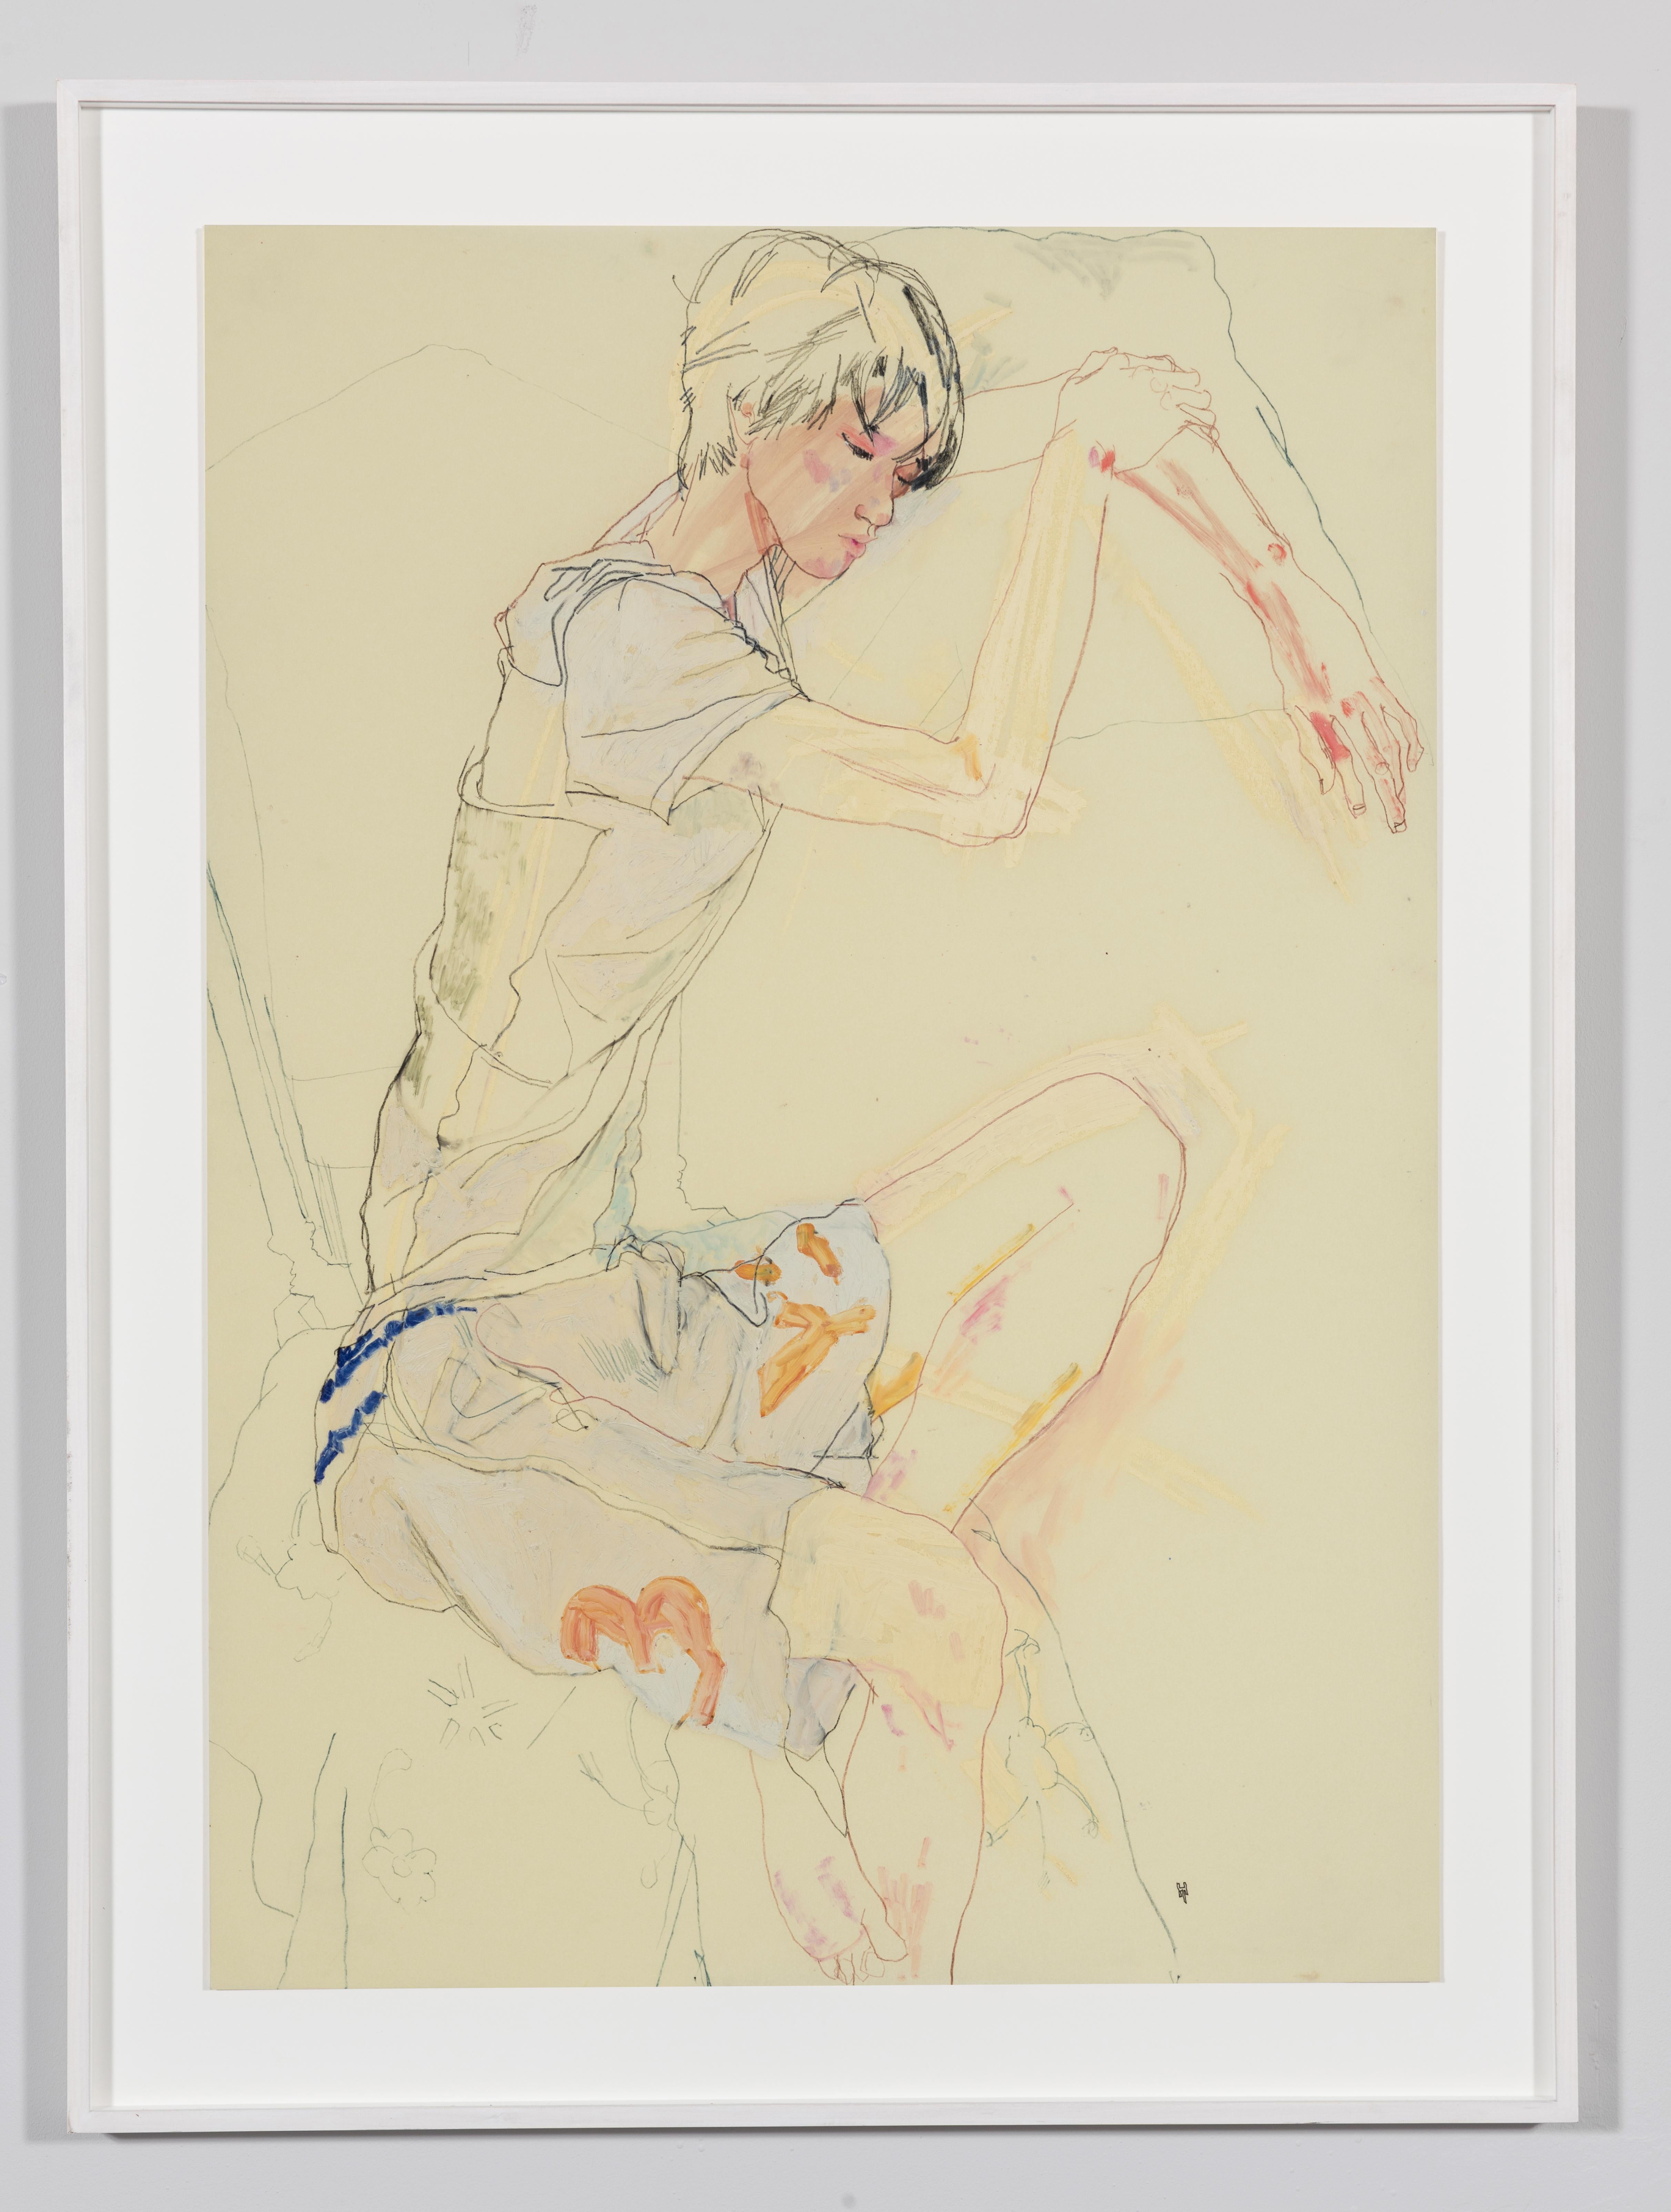 Nobu (Sitting, Arms on Pillow), Mixed media on Pergamenata parchment - Painting by Howard Tangye